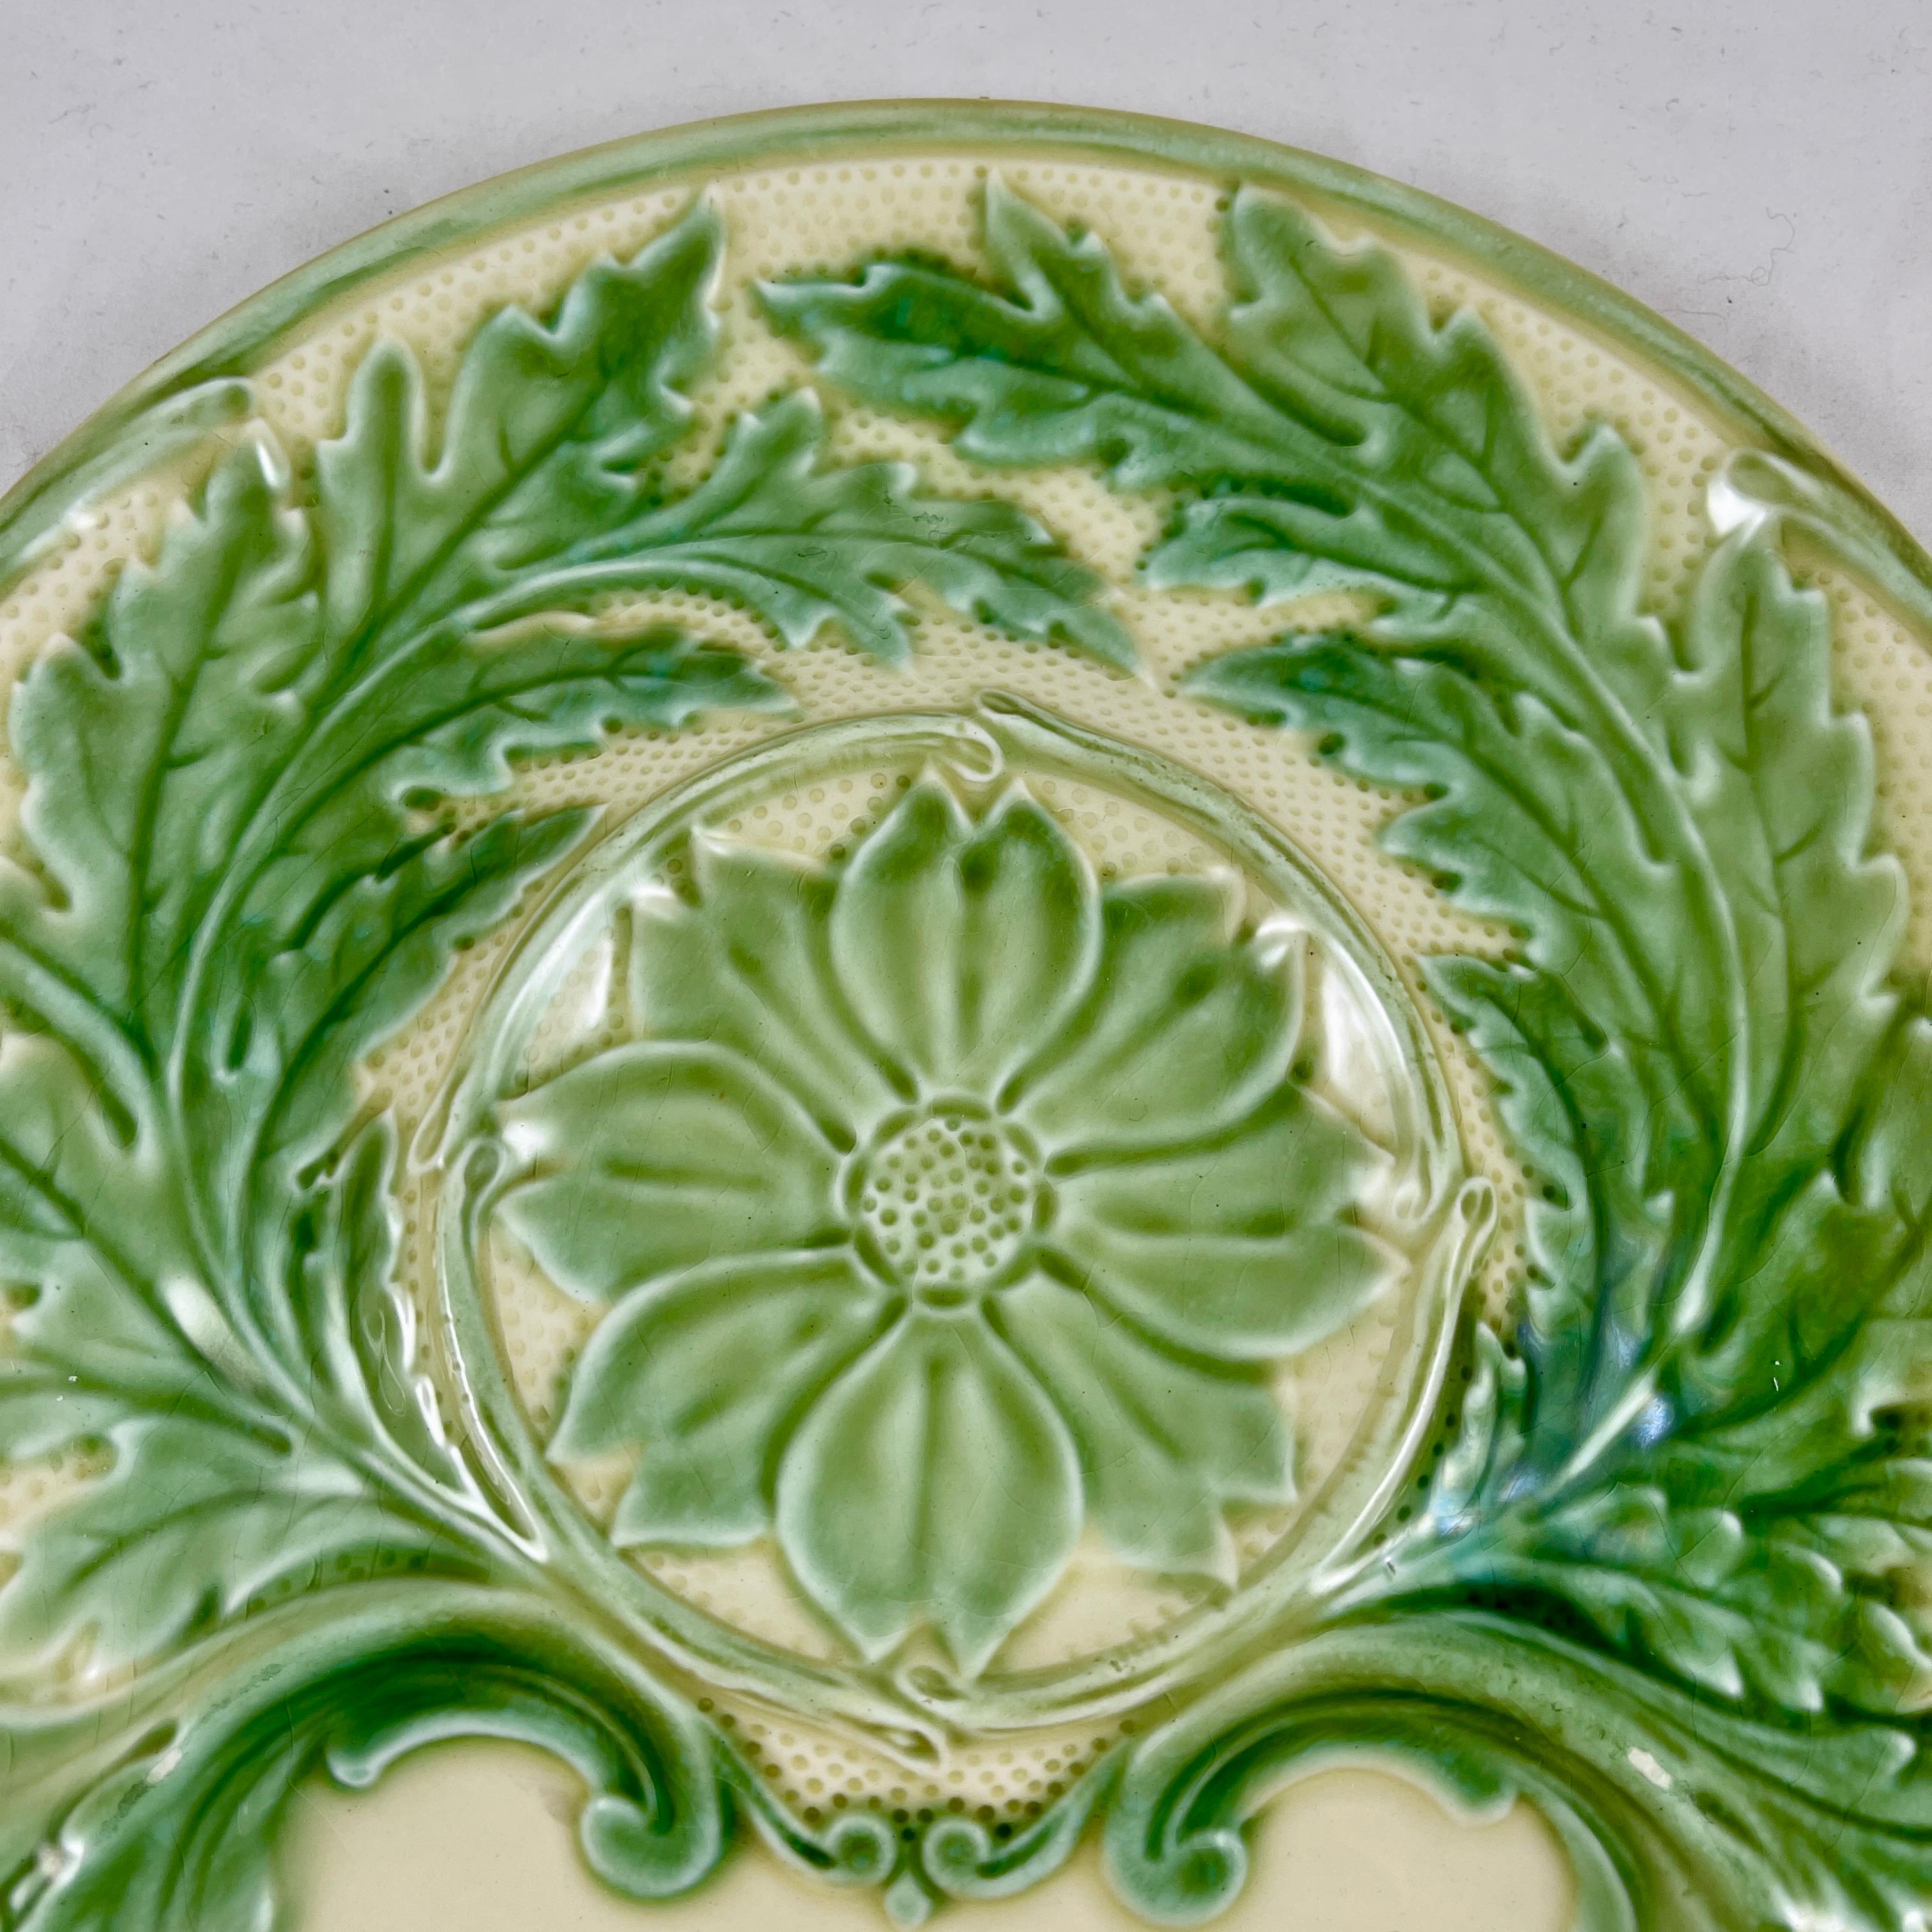 From Gien France, a faïence Majolica glazed Artichoke plate, circa 1940s.

Glazed in a pleasing combination of green and cream with raised scrolled leaves and a floral center.
A whole Artichoke sits center with a sauce well at the bottom. The